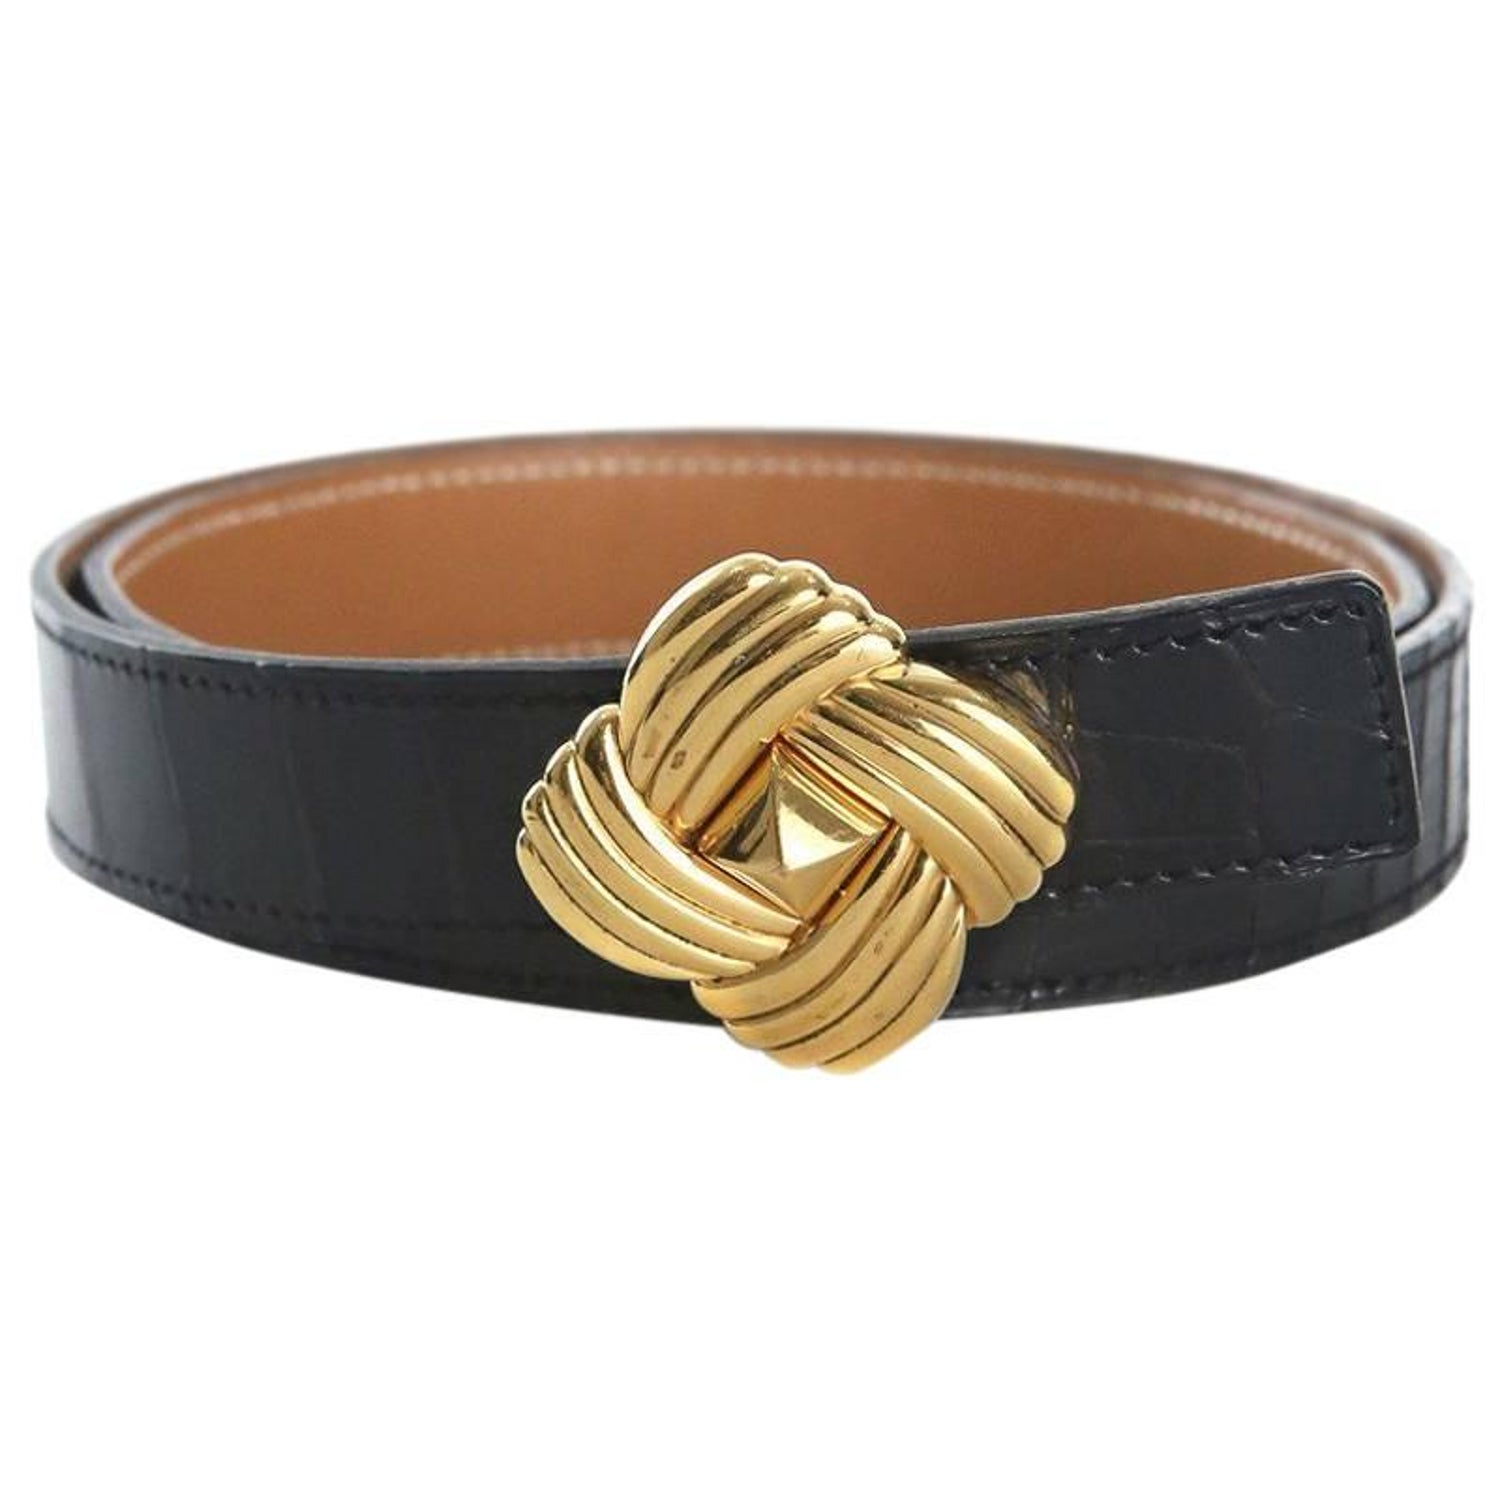 Hermes Patent Croc Belt from 1995 at 1stDibs